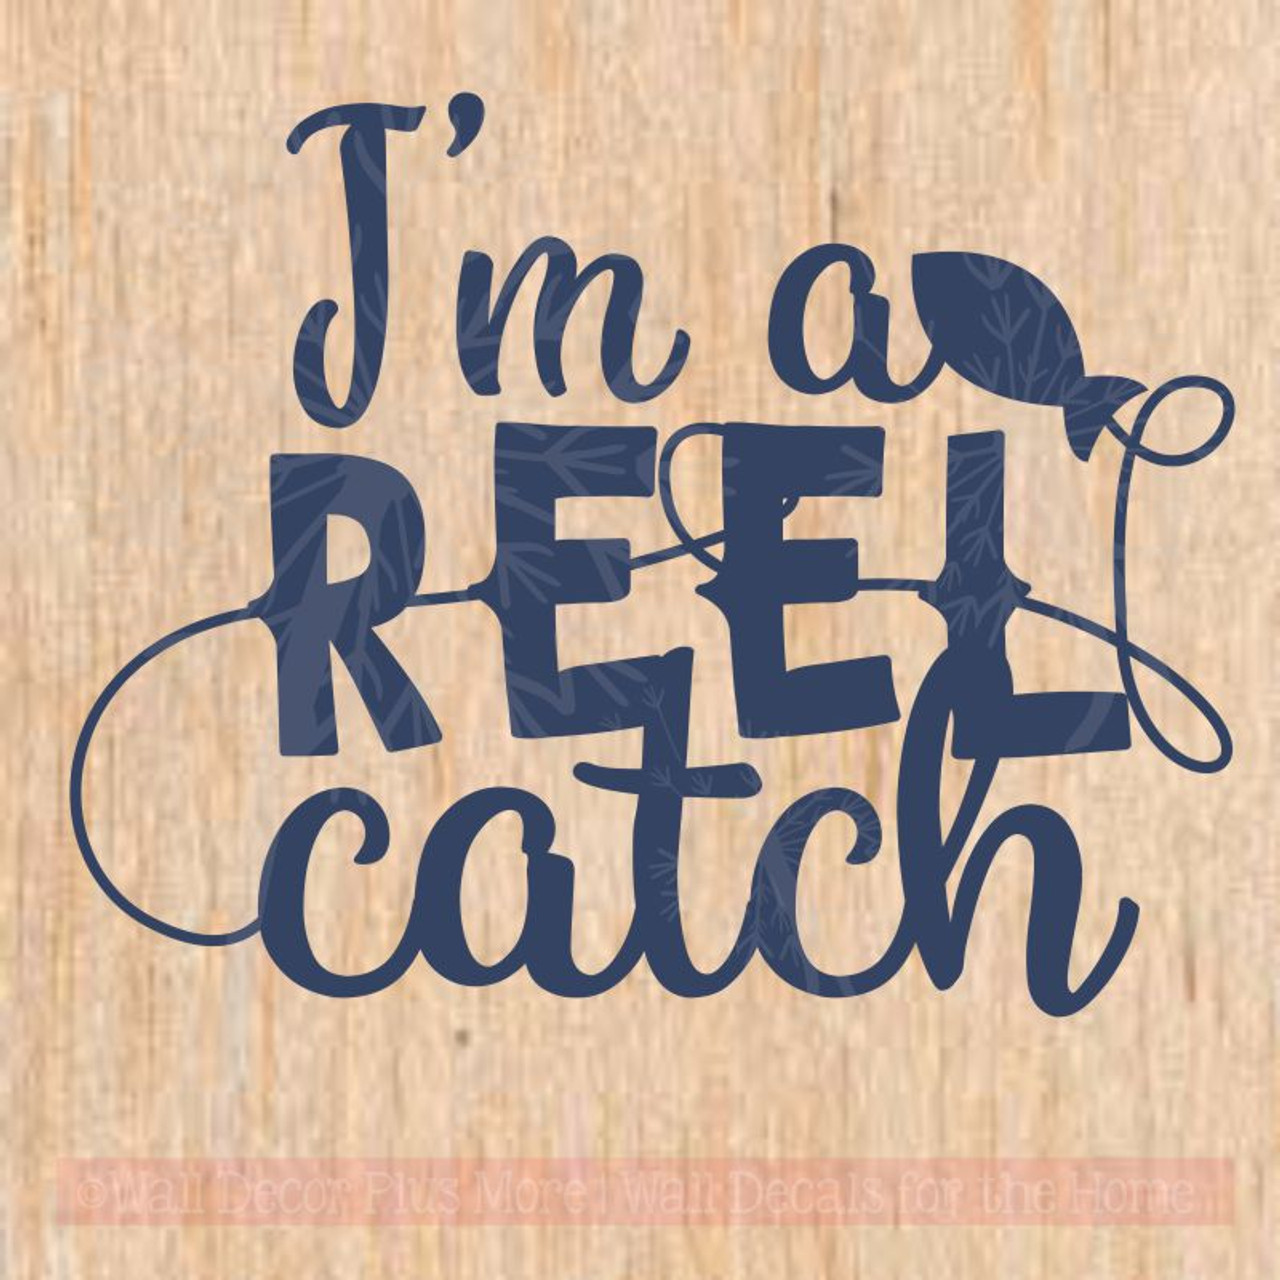 I'm a Reel Catch Fisherman Fishing Wall Quote Vinyl Sticker Decals